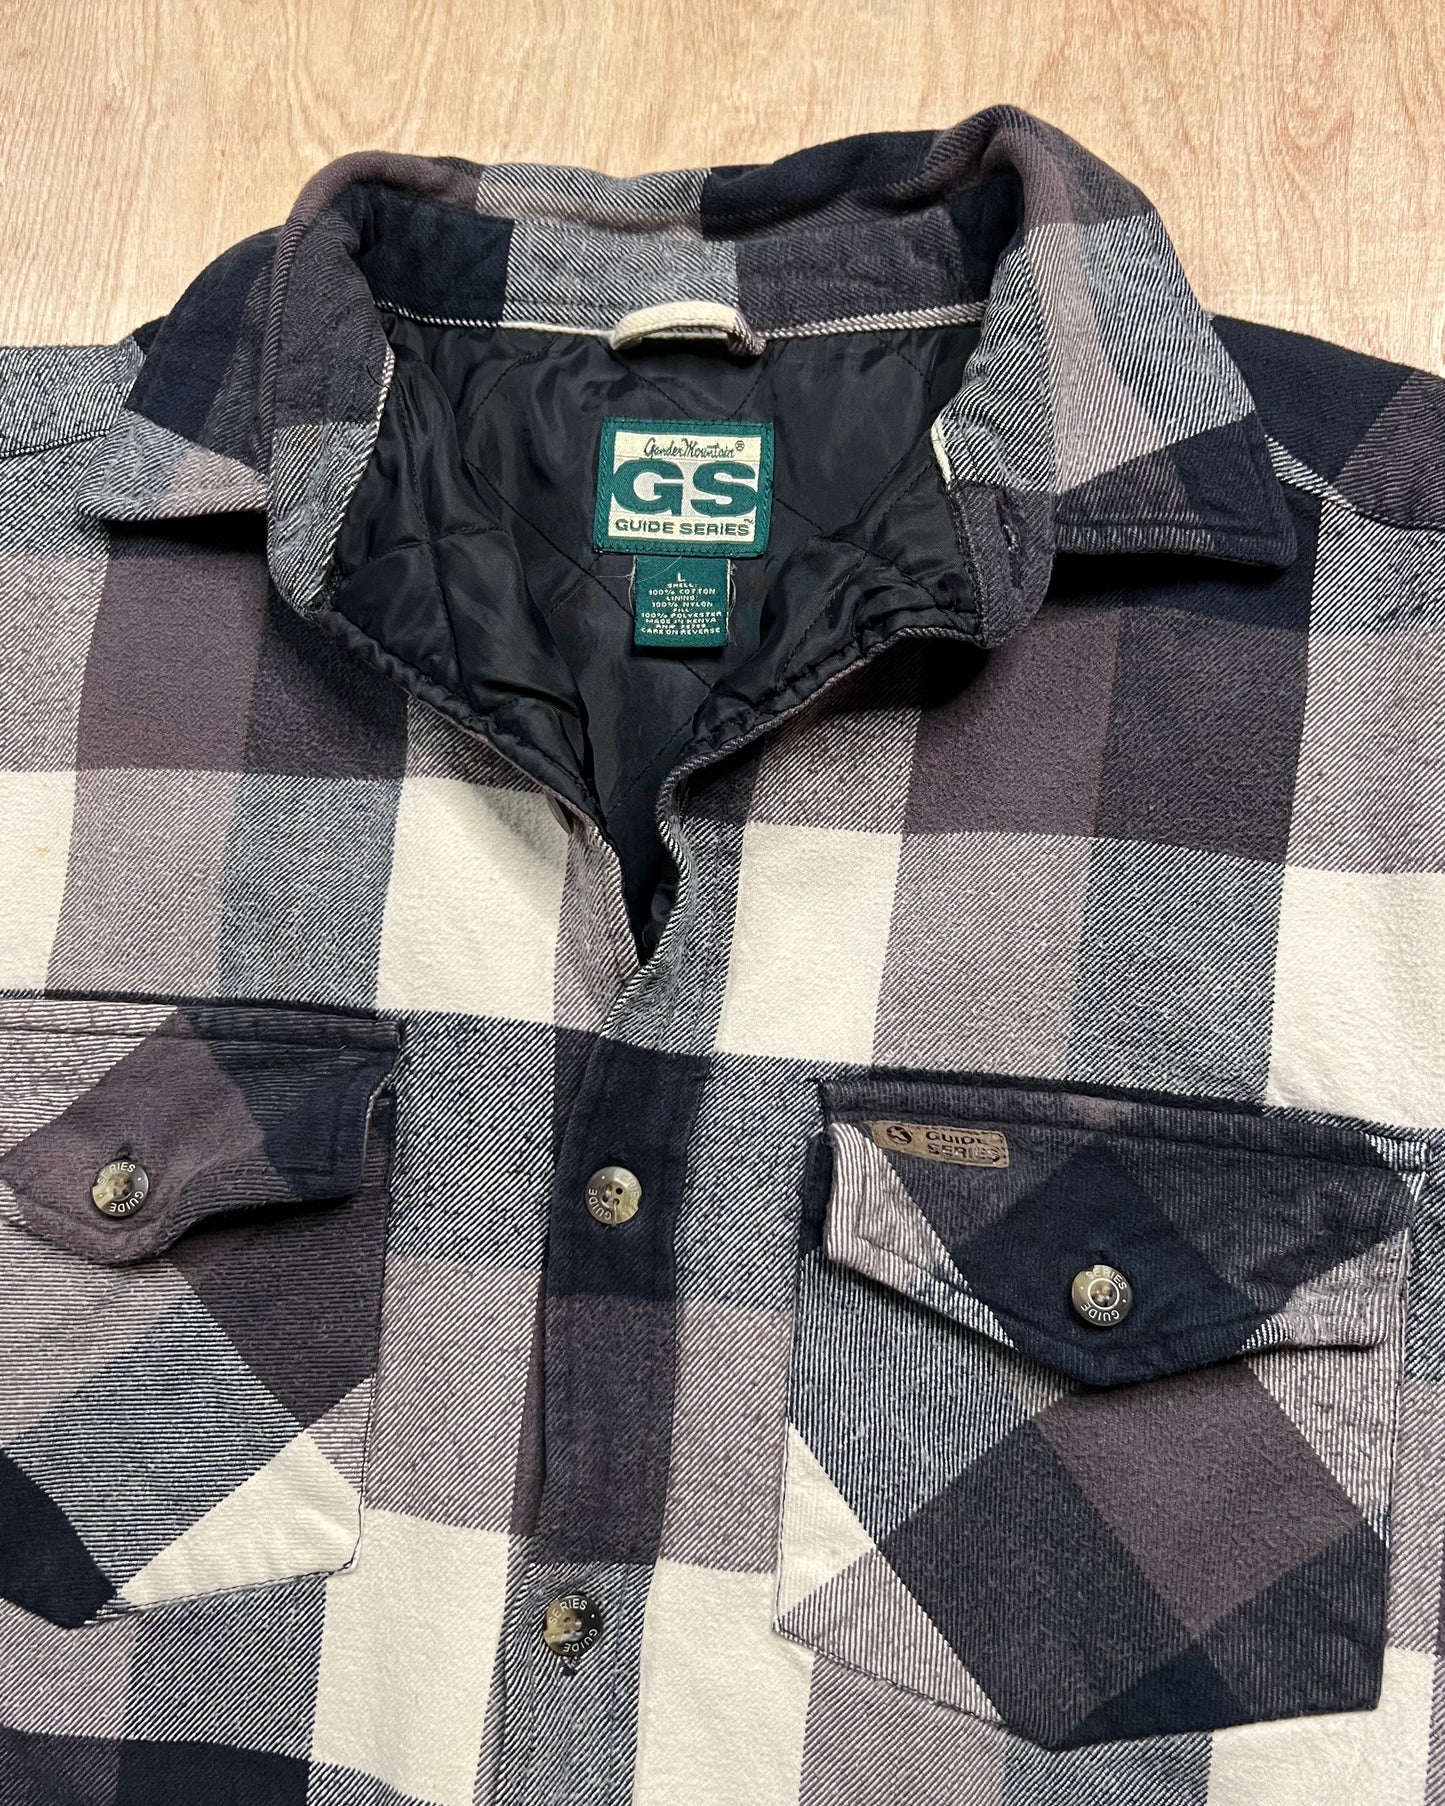 Vintage Gander Mountain Guide Series Insulated Flannel Jacket